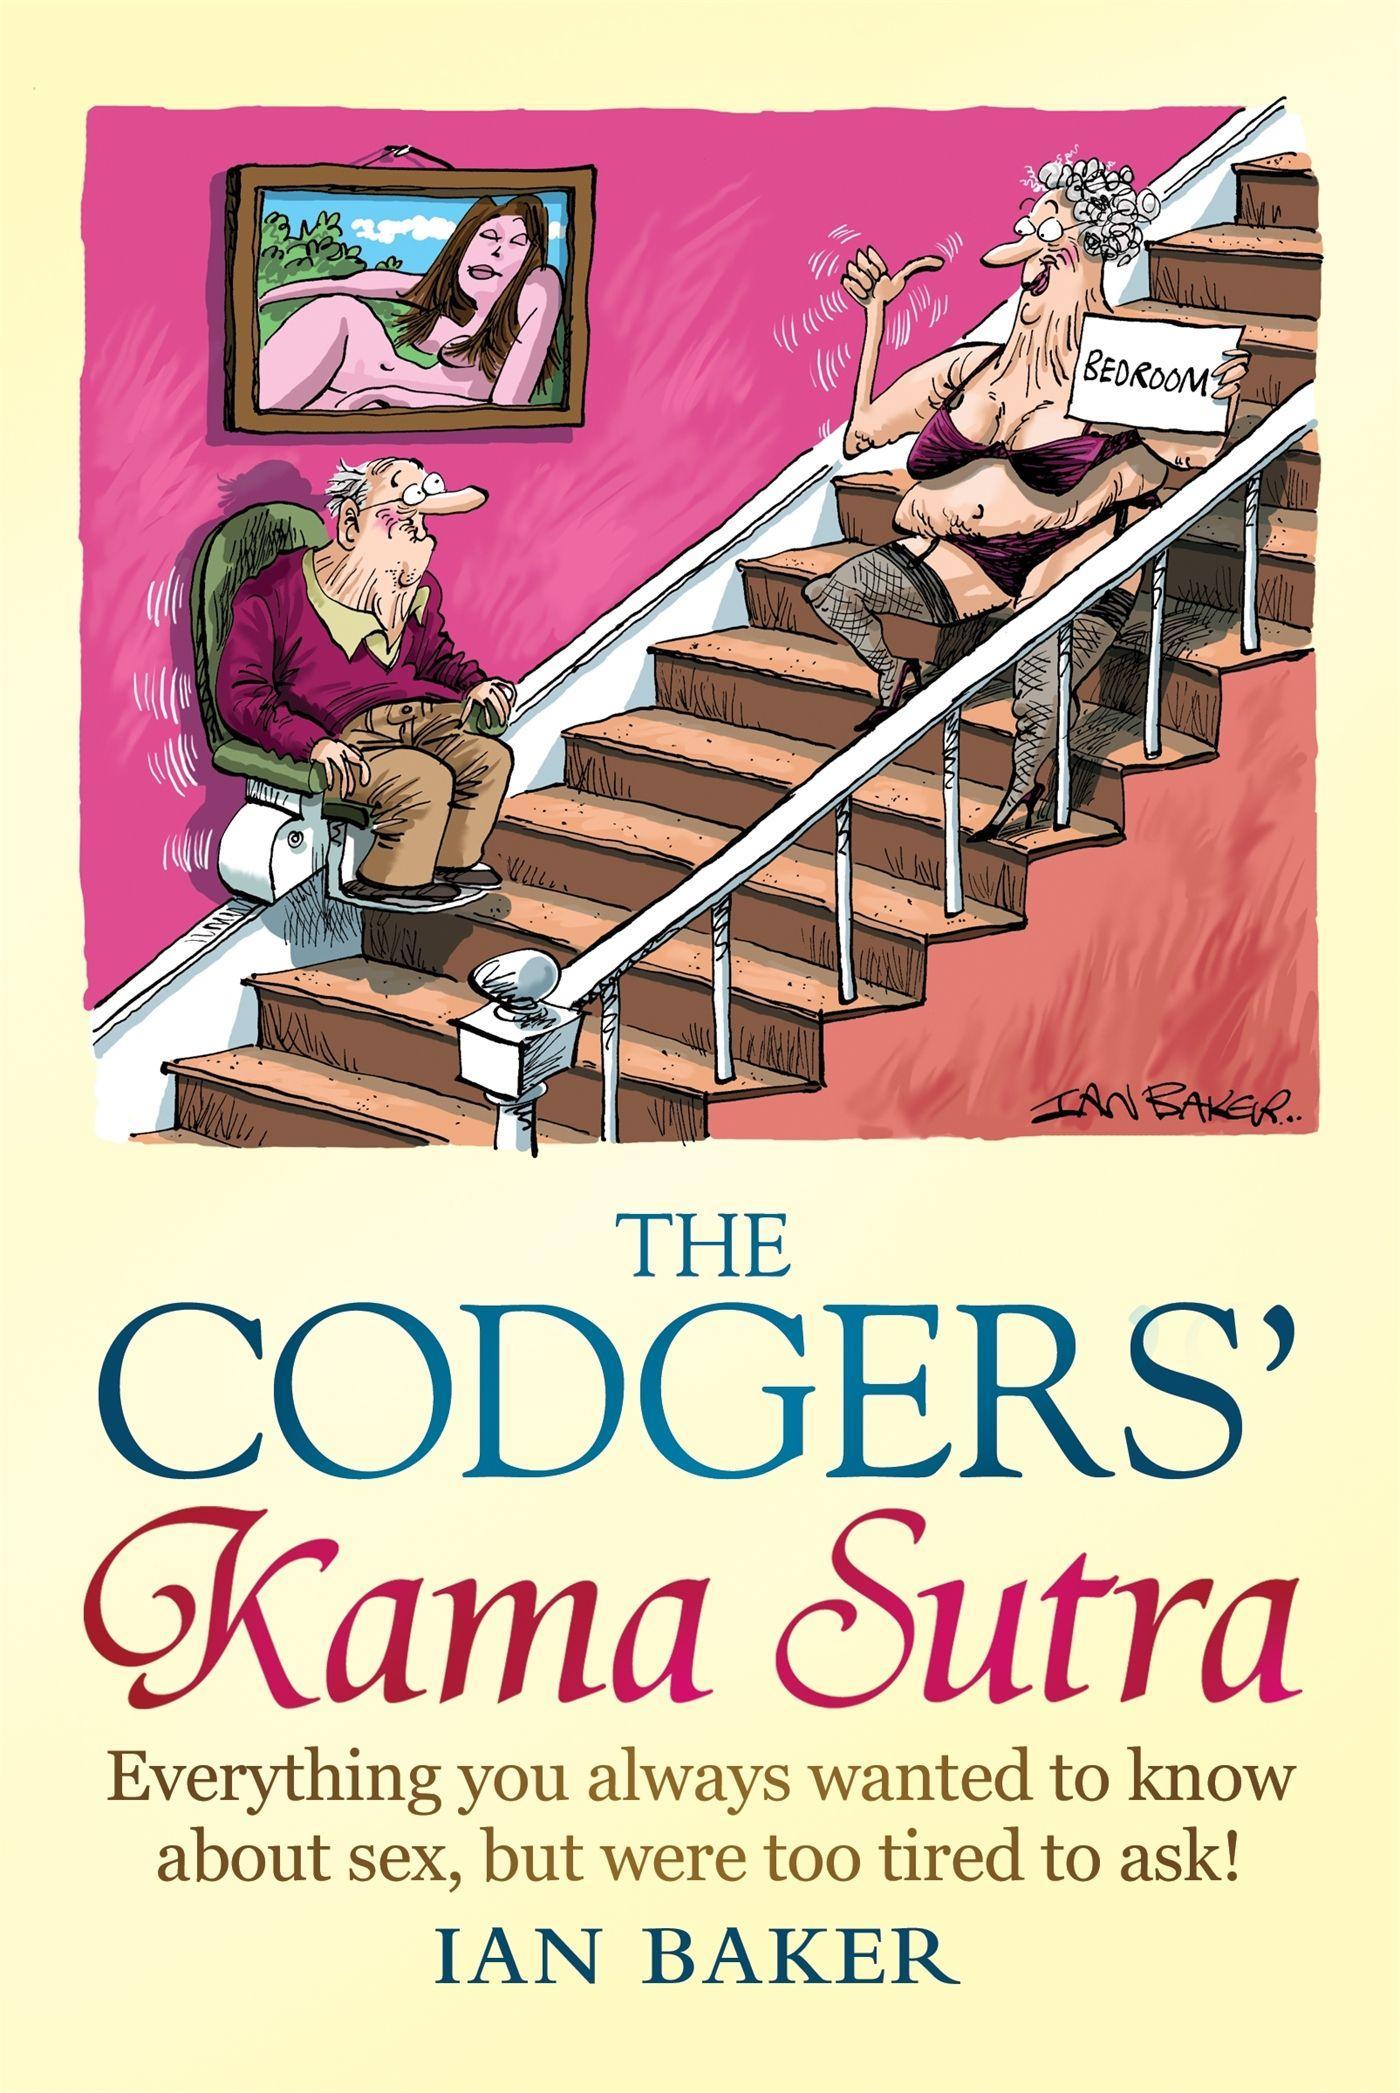 The Codgers' Kama Sutra / Everything You Wanted to Know About Sex but Were Too Tired to Ask / Ian Baker / Buch / Gebunden / Englisch / 2011 / Little, Brown Book Group / EAN 9781849016520 - Baker, Ian